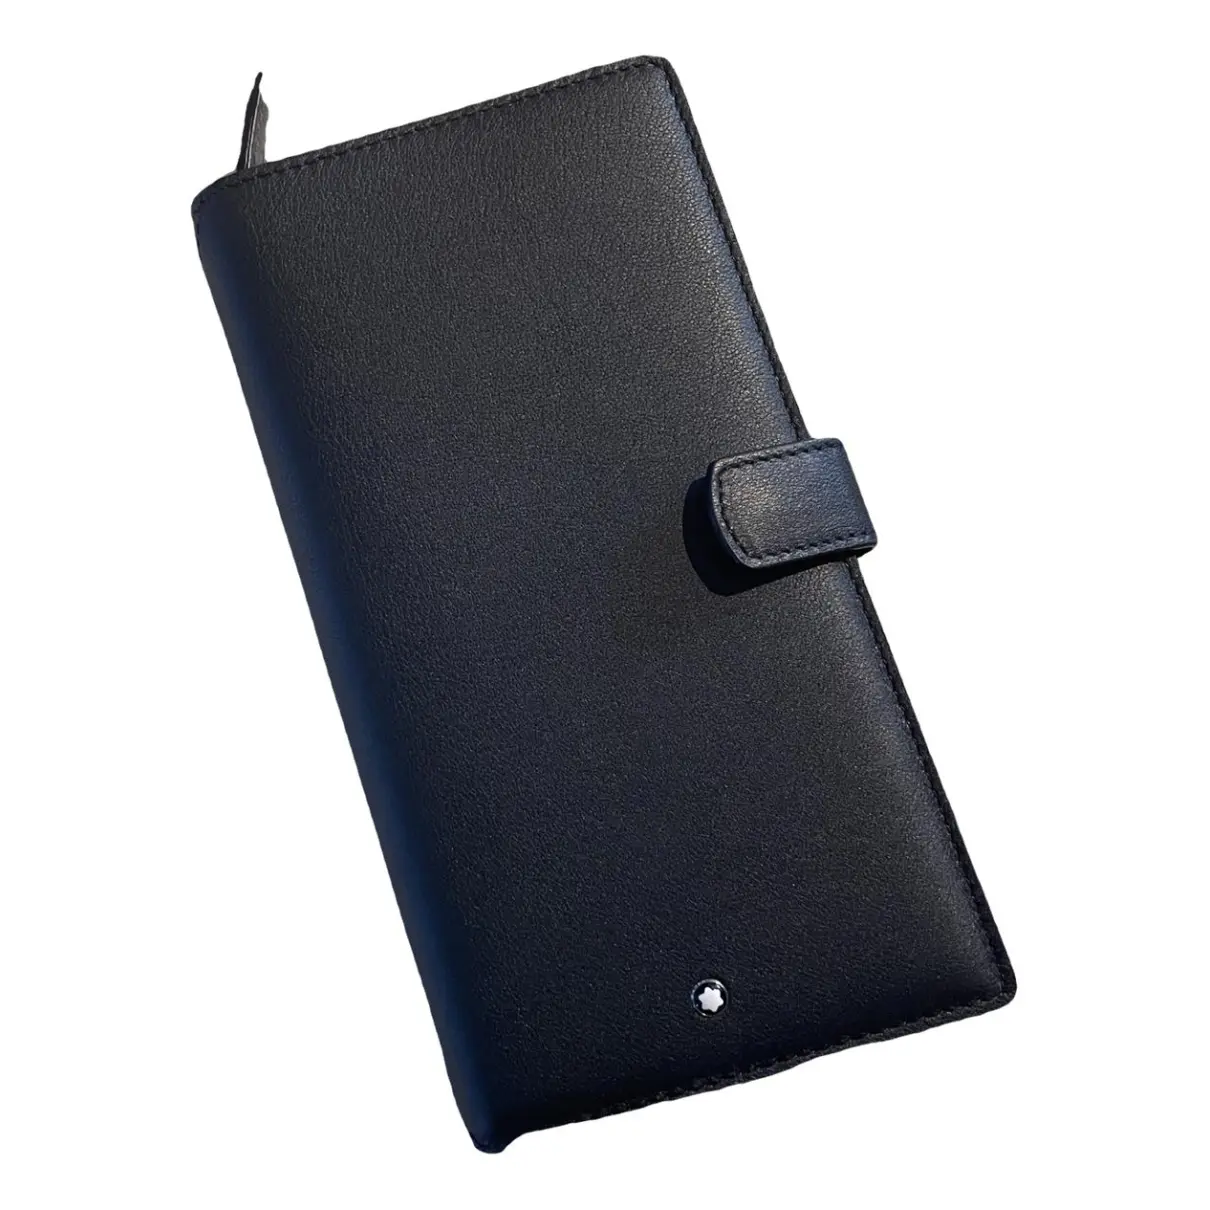 Leather wallet Montblanc